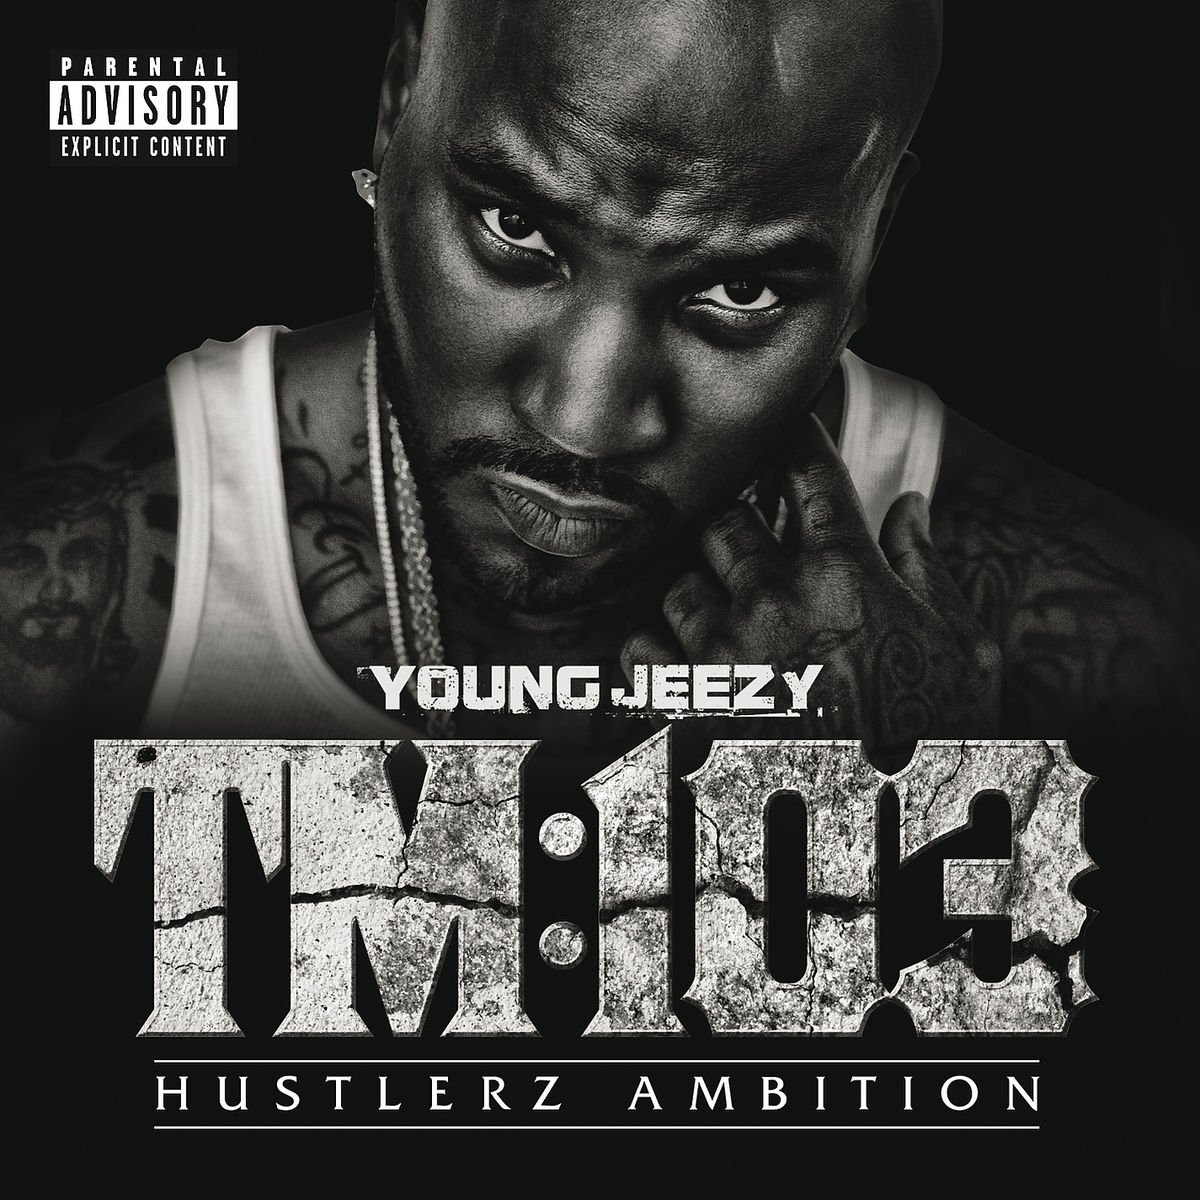 young jeezy tm103 download mp3